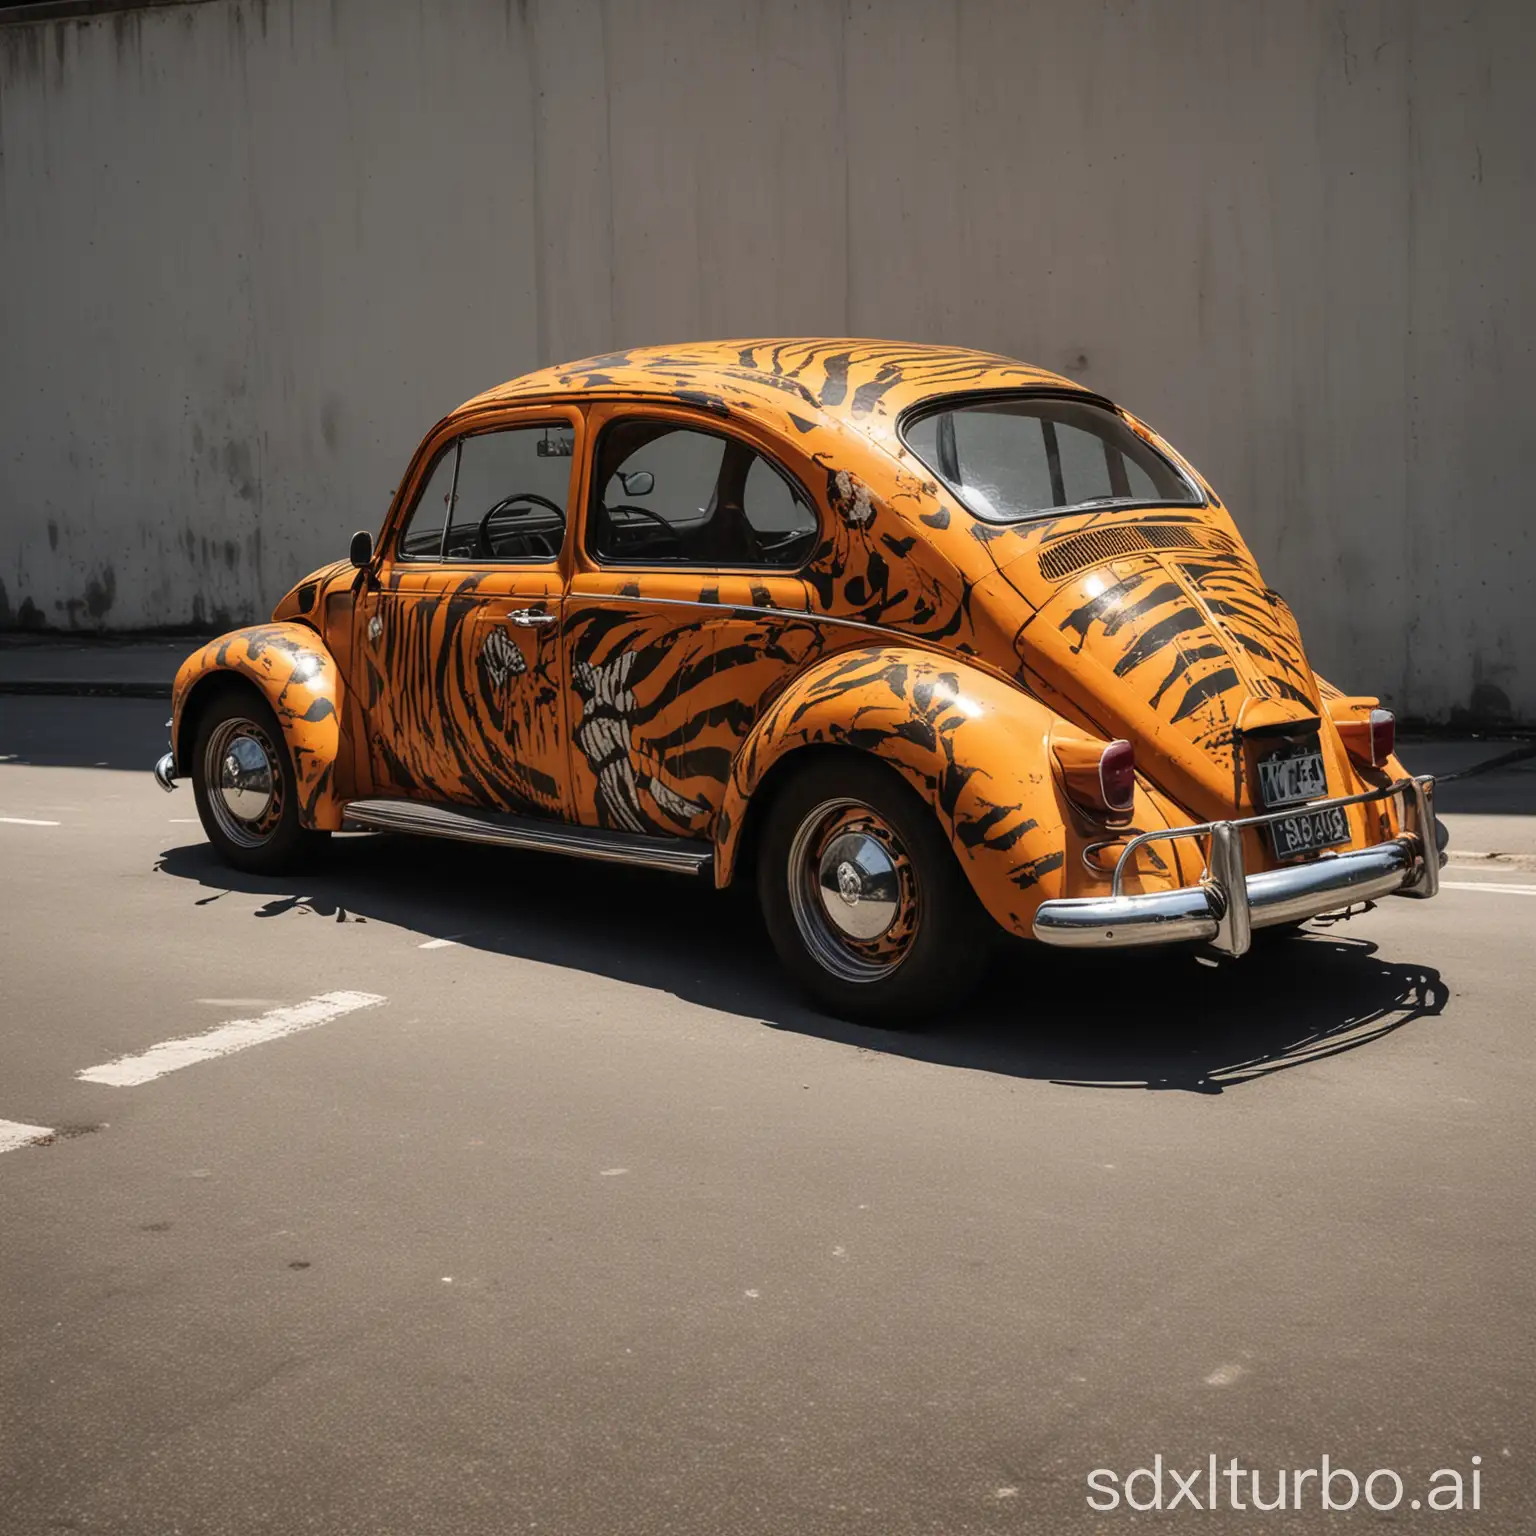 photographic style, Volkswagen Type1 painted like a tiger